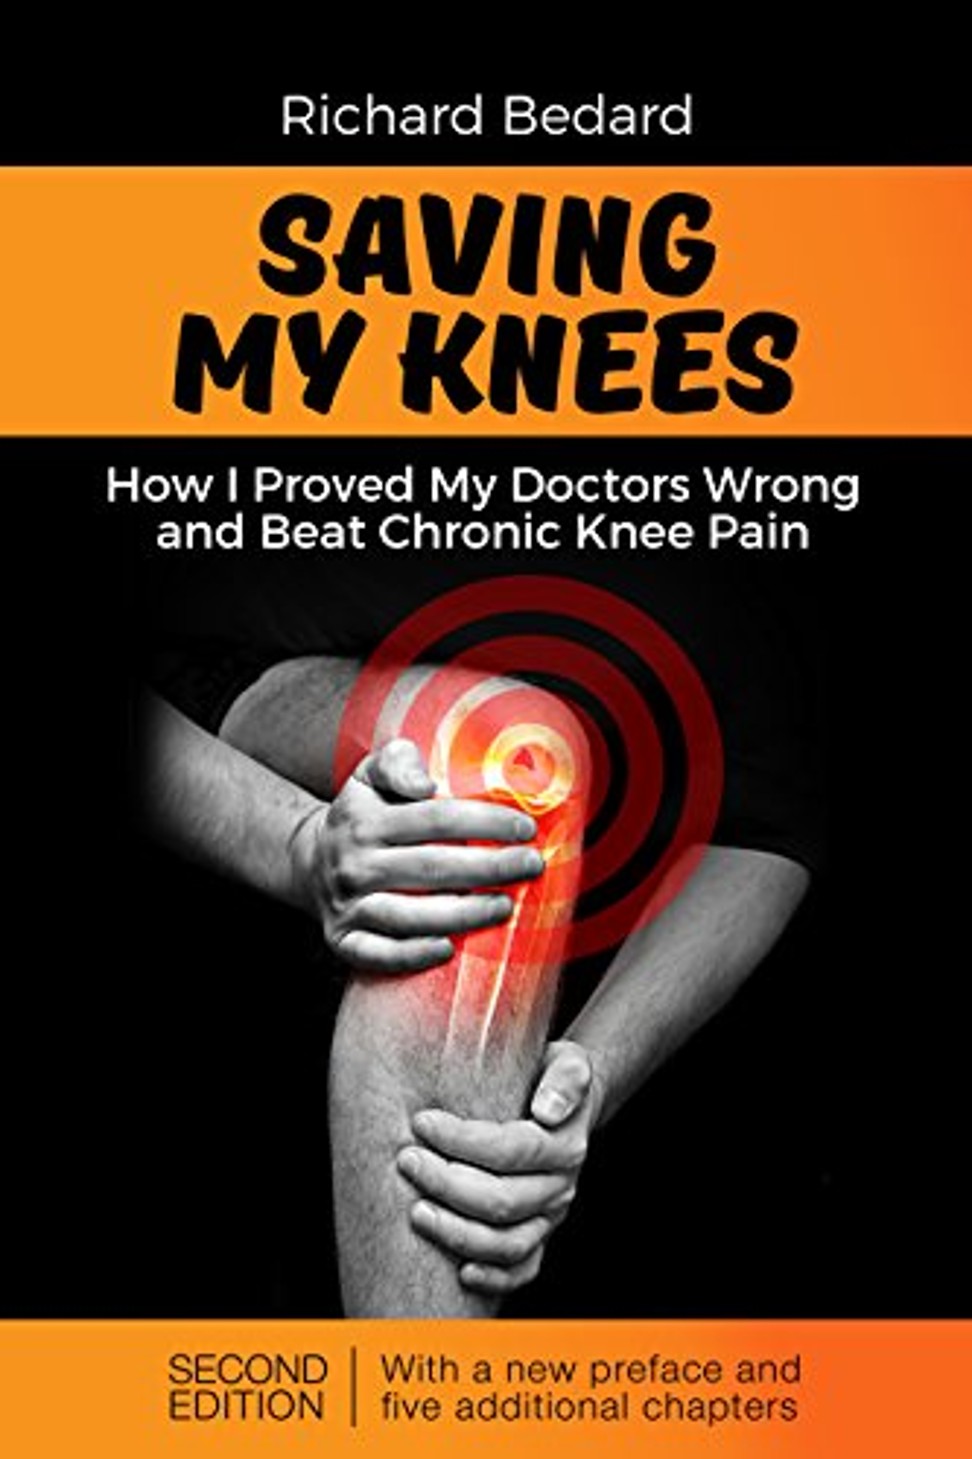 Richard Bedard has written an e-book about his successful effort to fix his knees without surgery. Photo: Handout